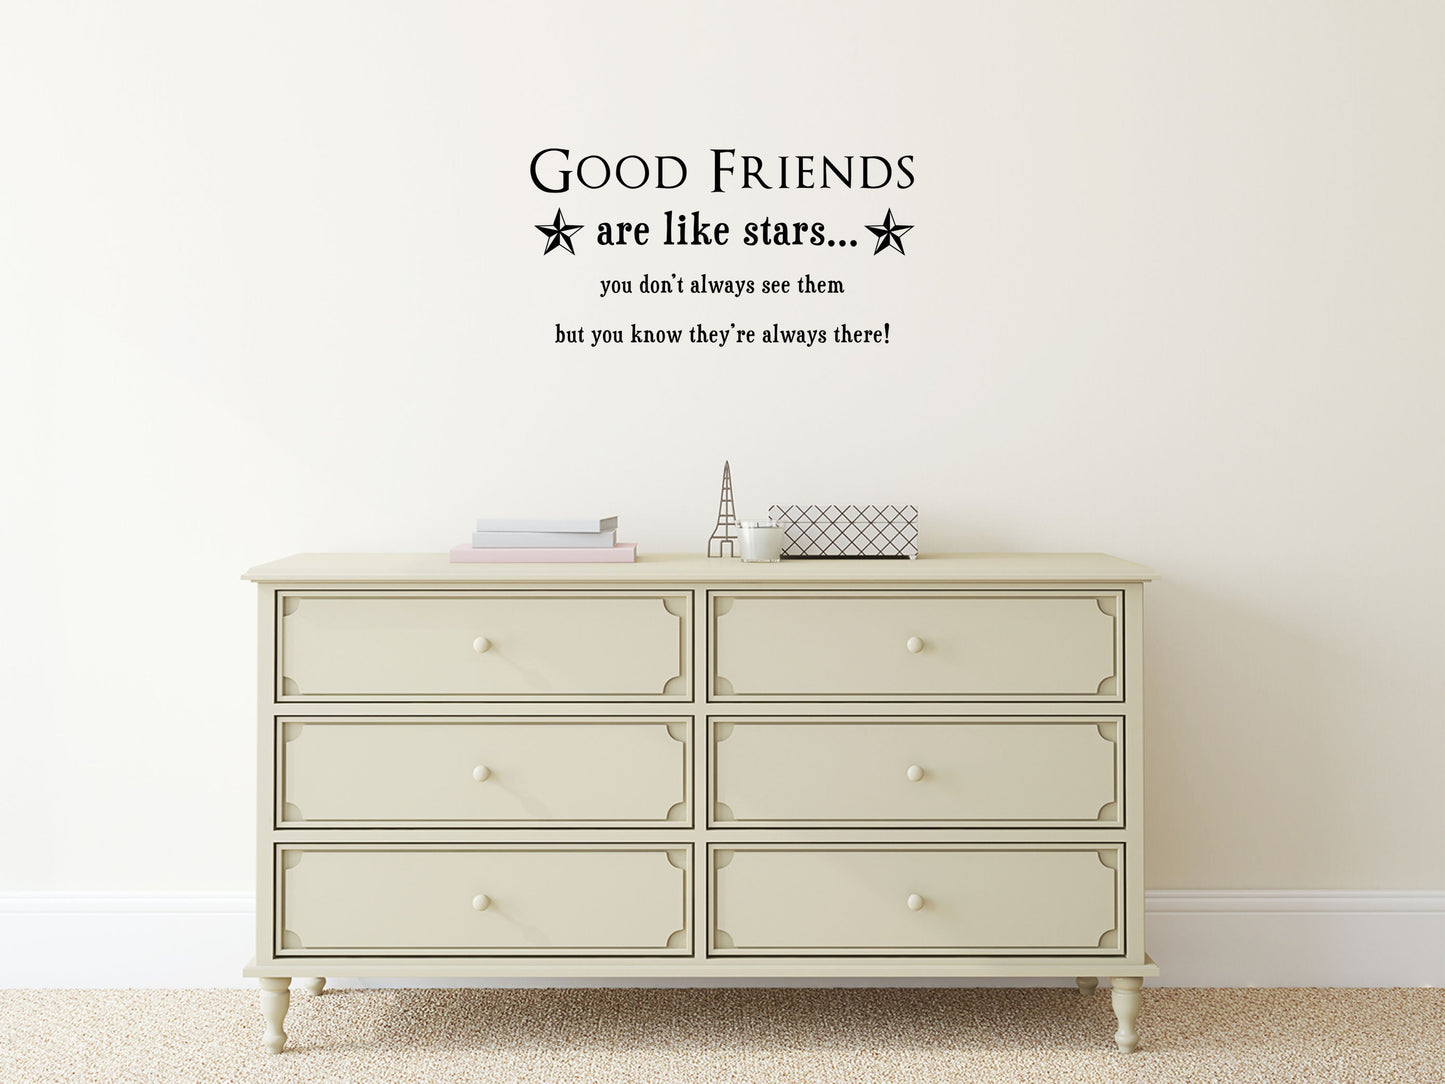 Good Friends Are Like Stars - Family Friends Wall Quotes - Inspirational Wall Decals Vinyl Wall Decal Inspirational Wall Signs 